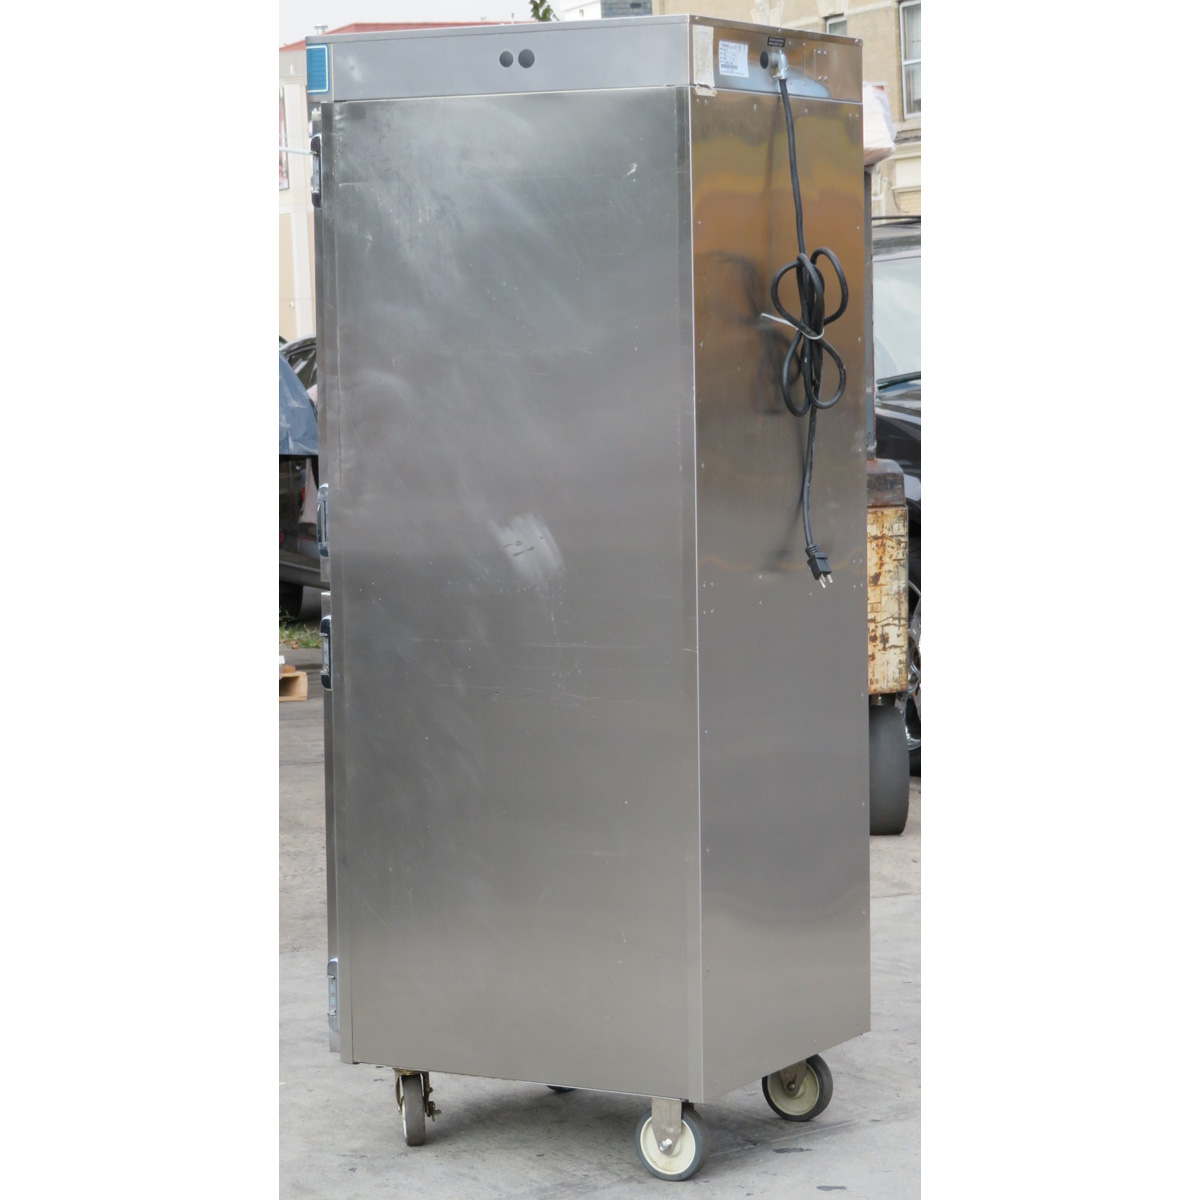 Alto Shaam 1200-UP Low Temperature Double Hot Food Holding Cabinet, Used Good Condition image 1